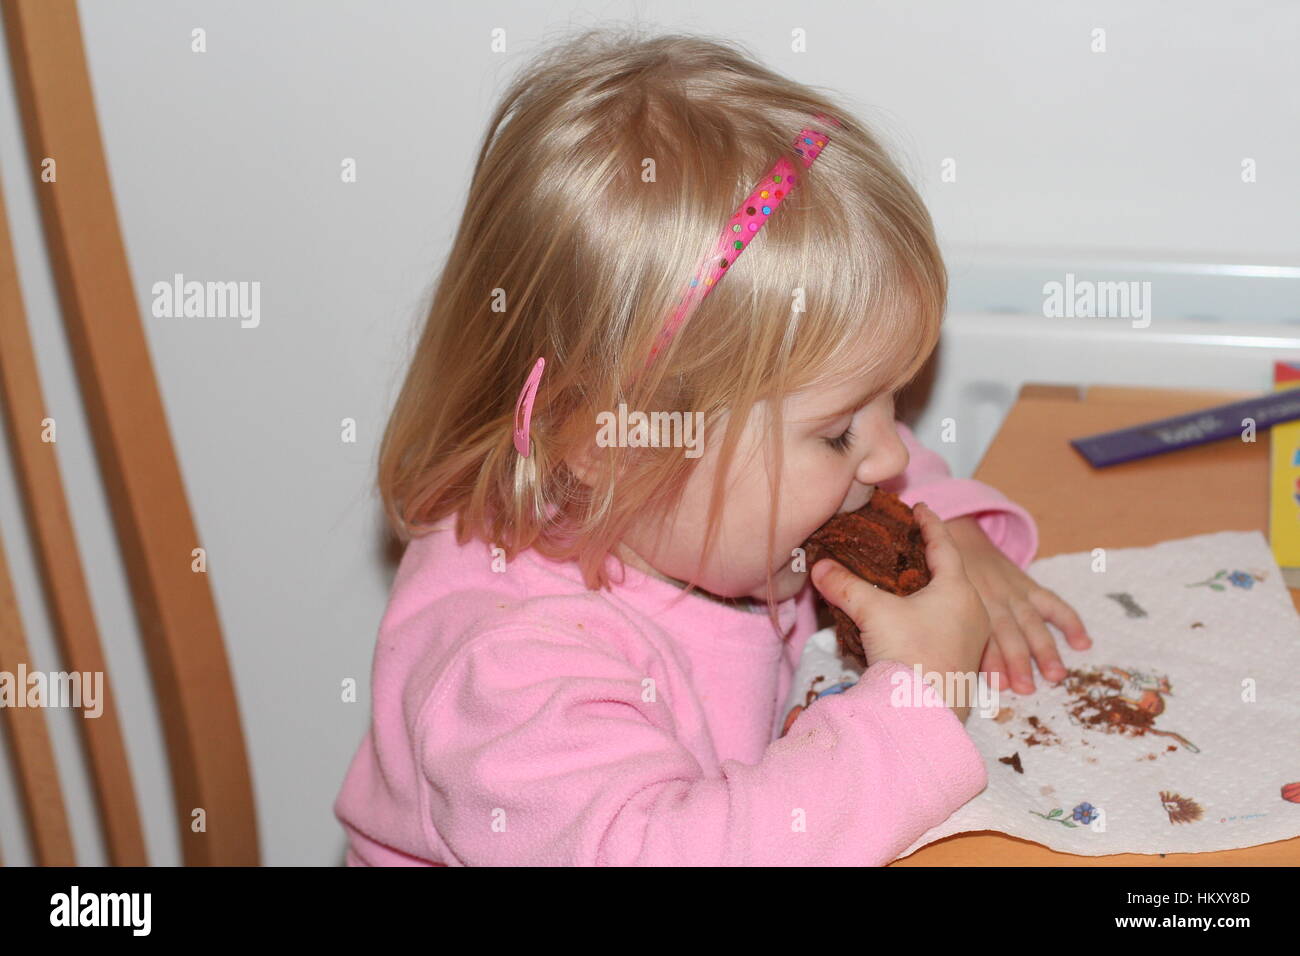 Little blonde girl/ toddler child devouring a slice of chocolate cake joy concept, happy little kid contentment concept happy happiness Stock Photo